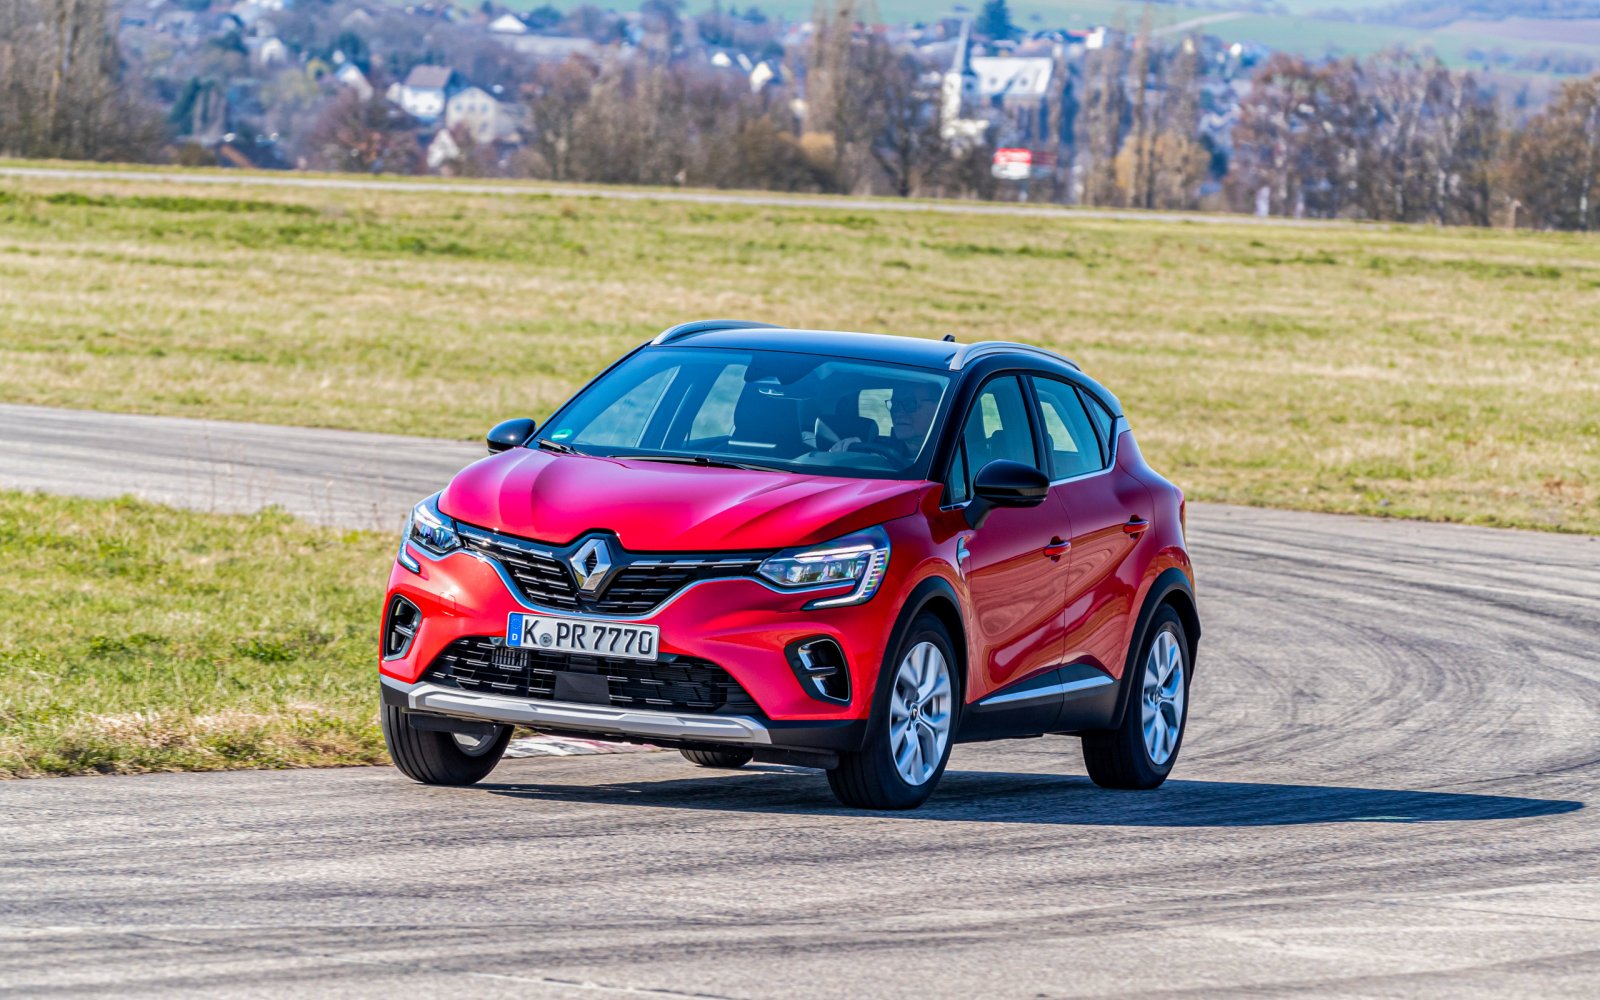 Test Renault Captur vs.  Nissan Juke: which one gets the best in terms of space and comfort?